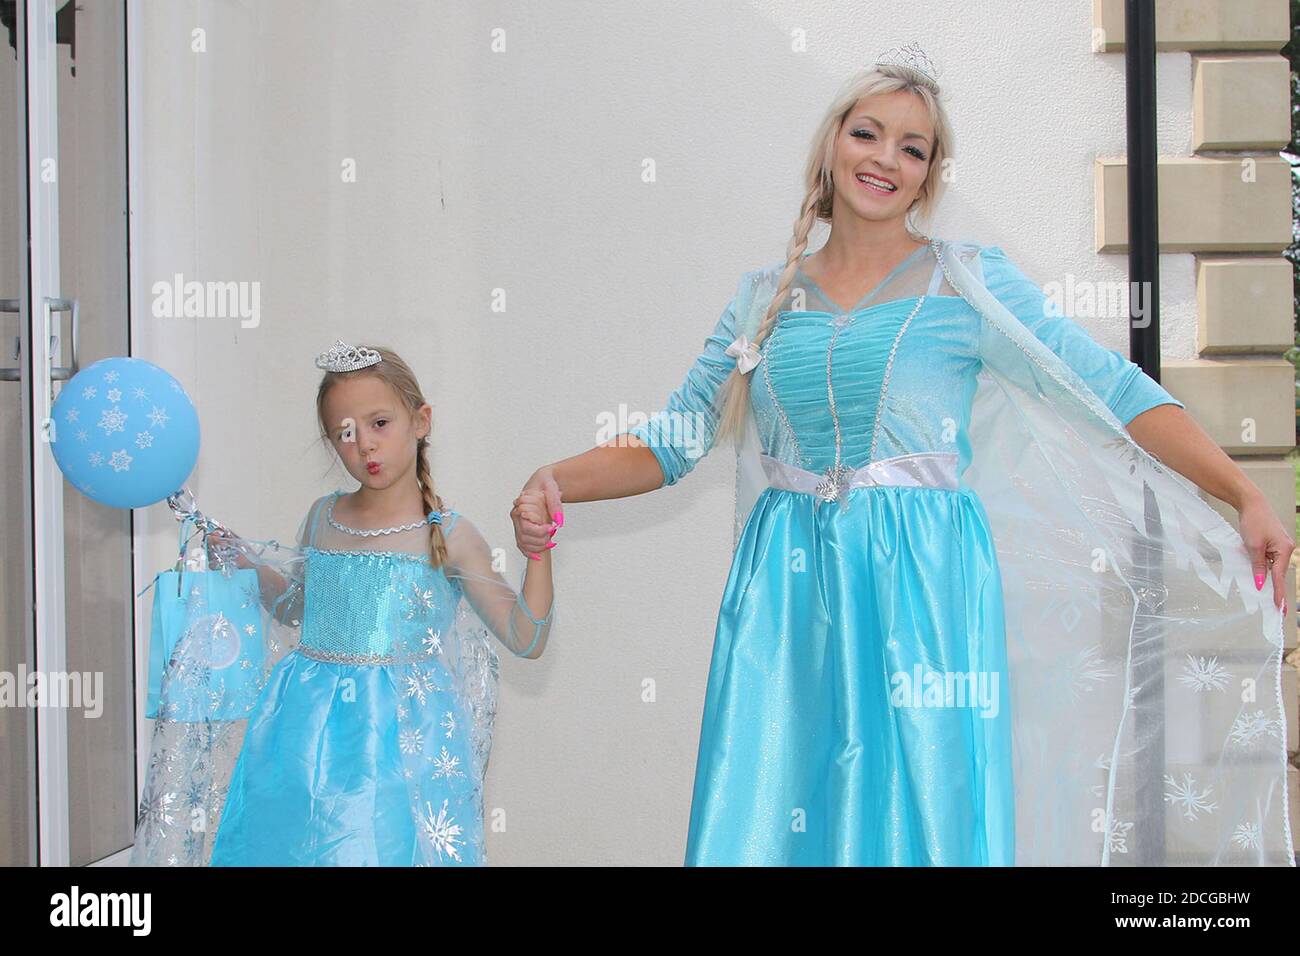 Costume fancy dress characters. Woman dressed as Elsa from frozen with a little girls dressed as a princess Stock Photo